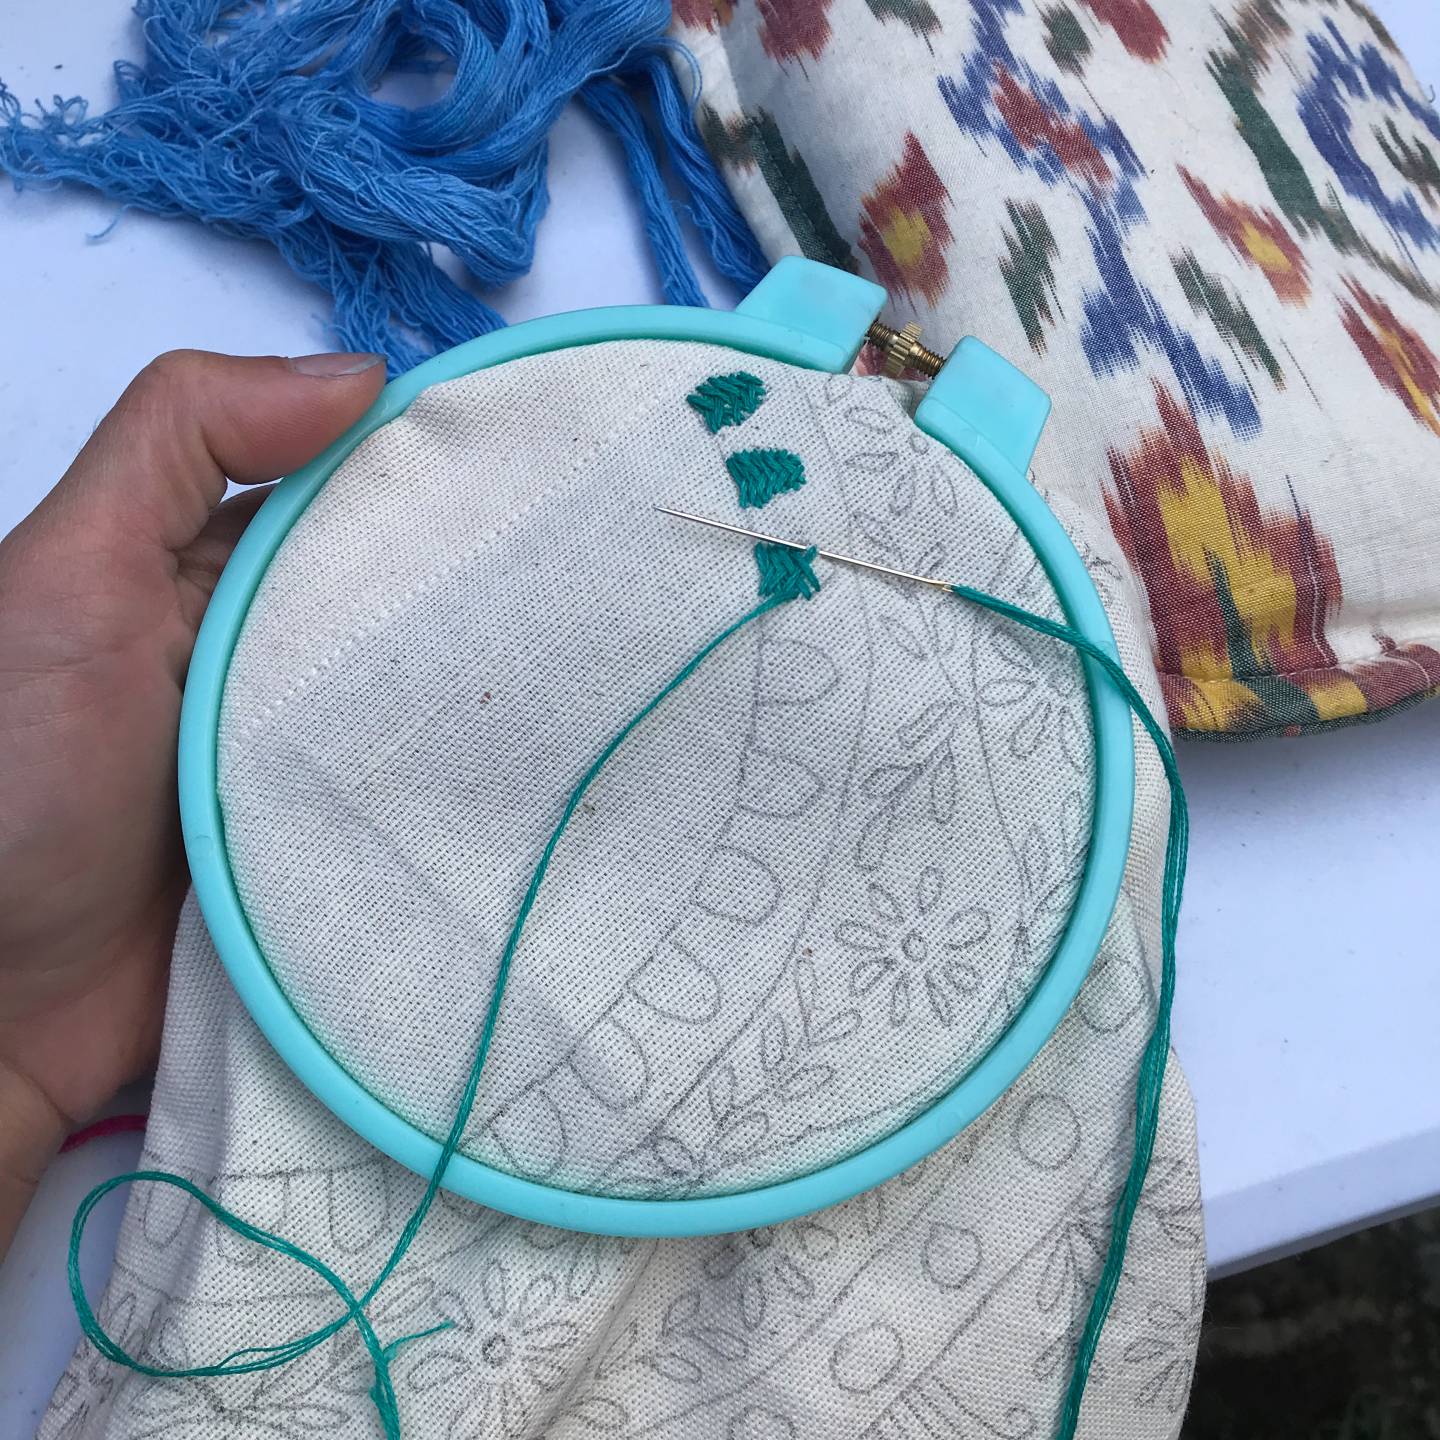 Small group BARRILETE embroidery with Claribel! / TBD